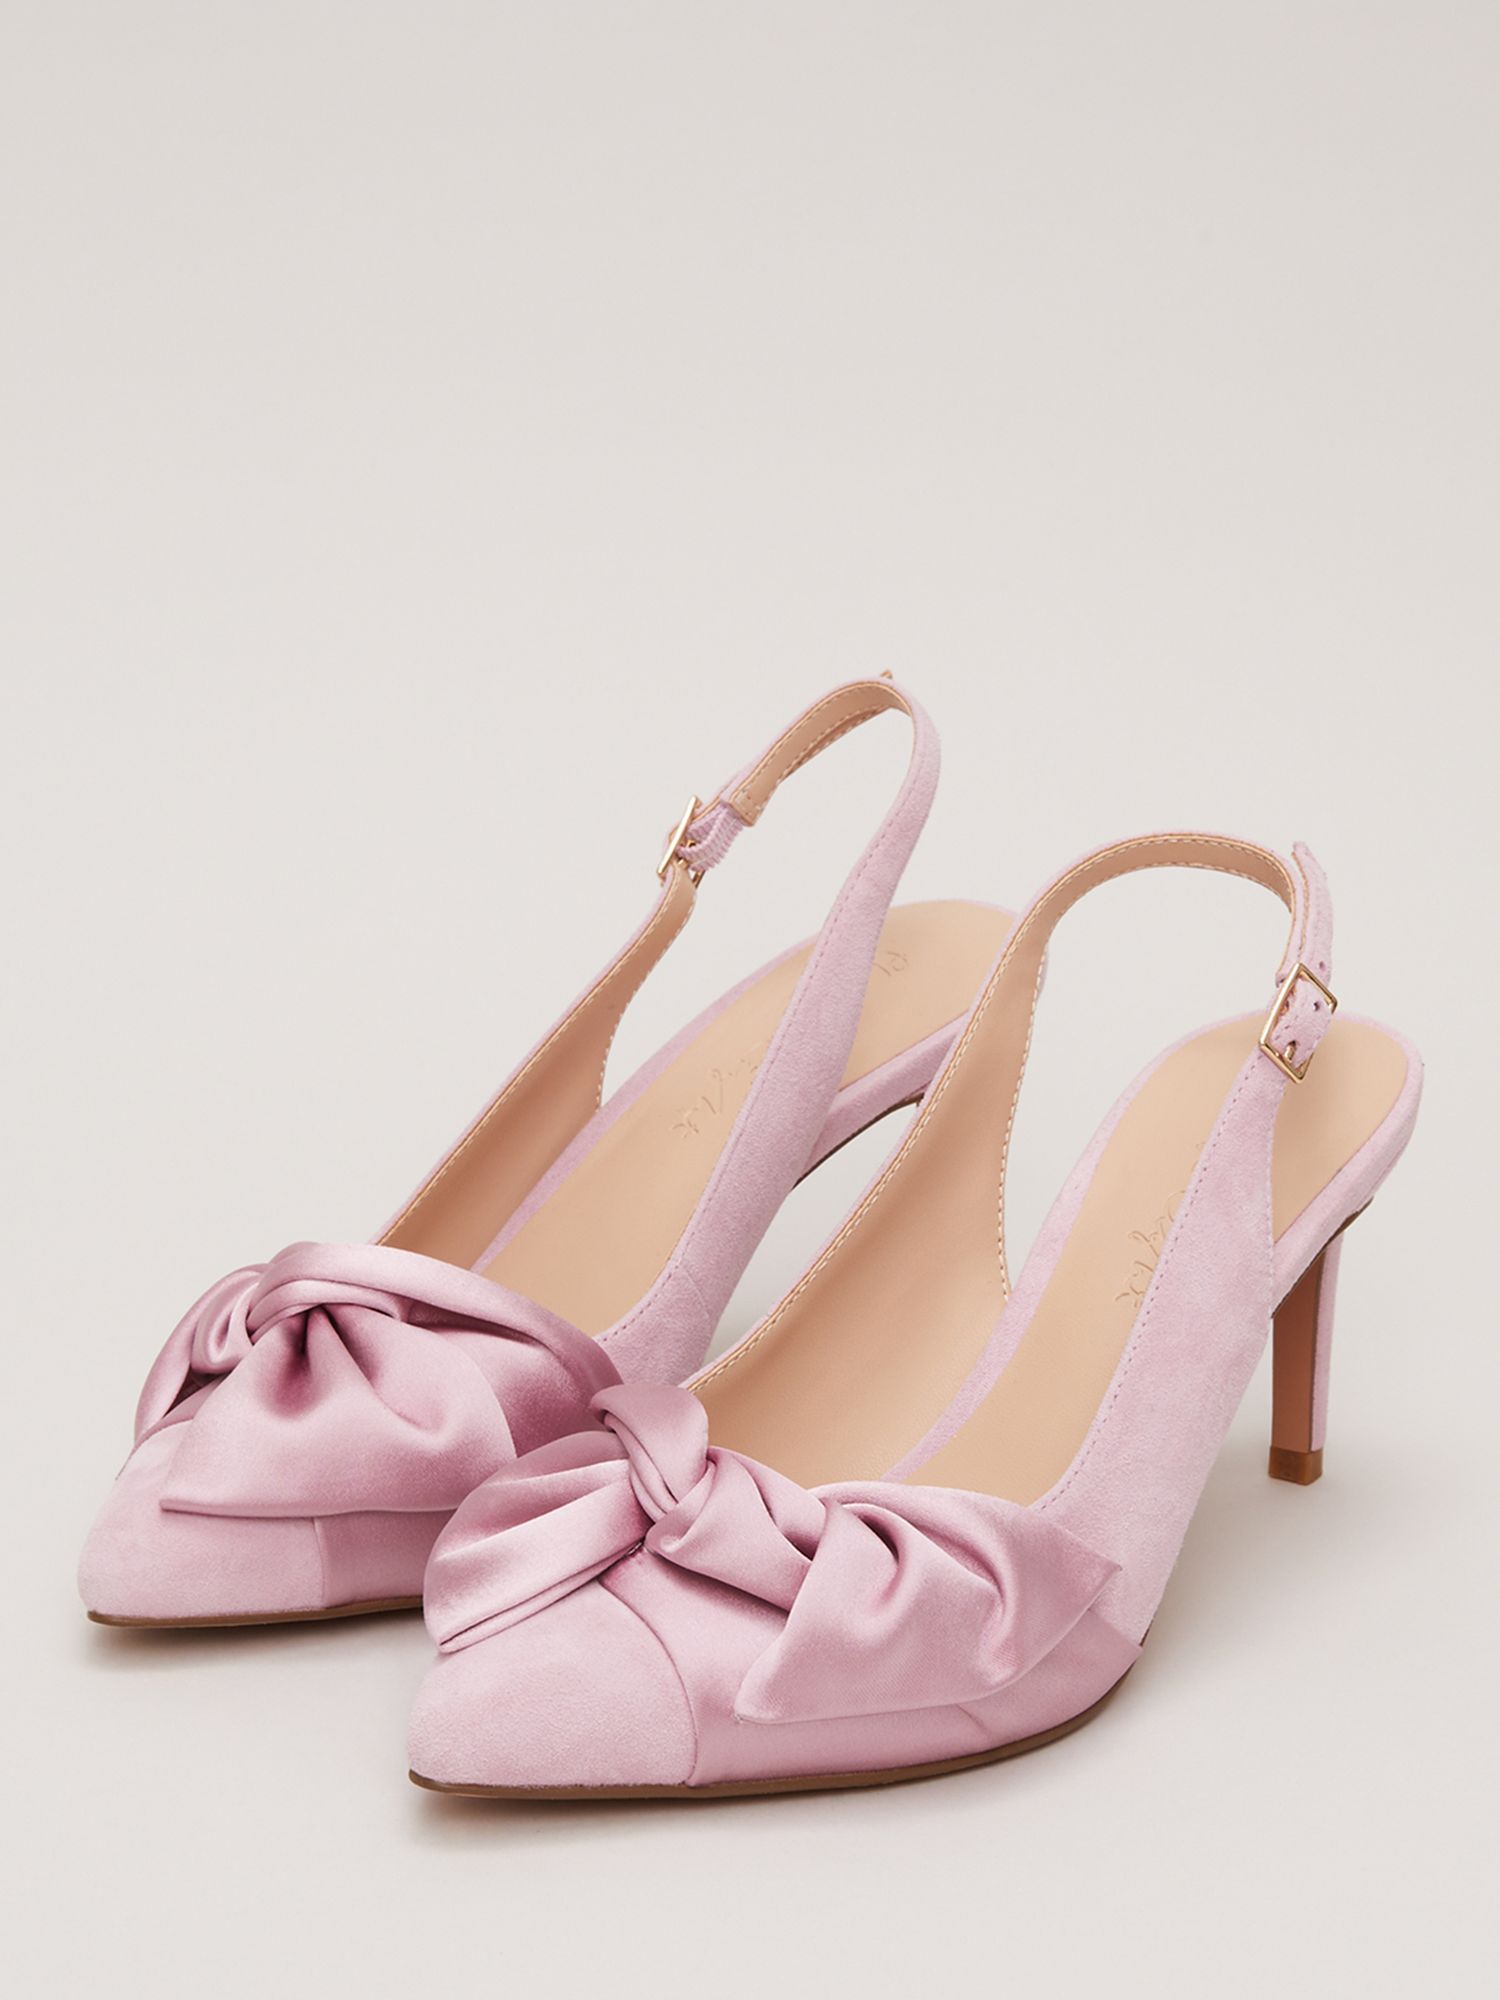 Phase Eight Twist Front Pointed Toe Shoes, Pink, EU36